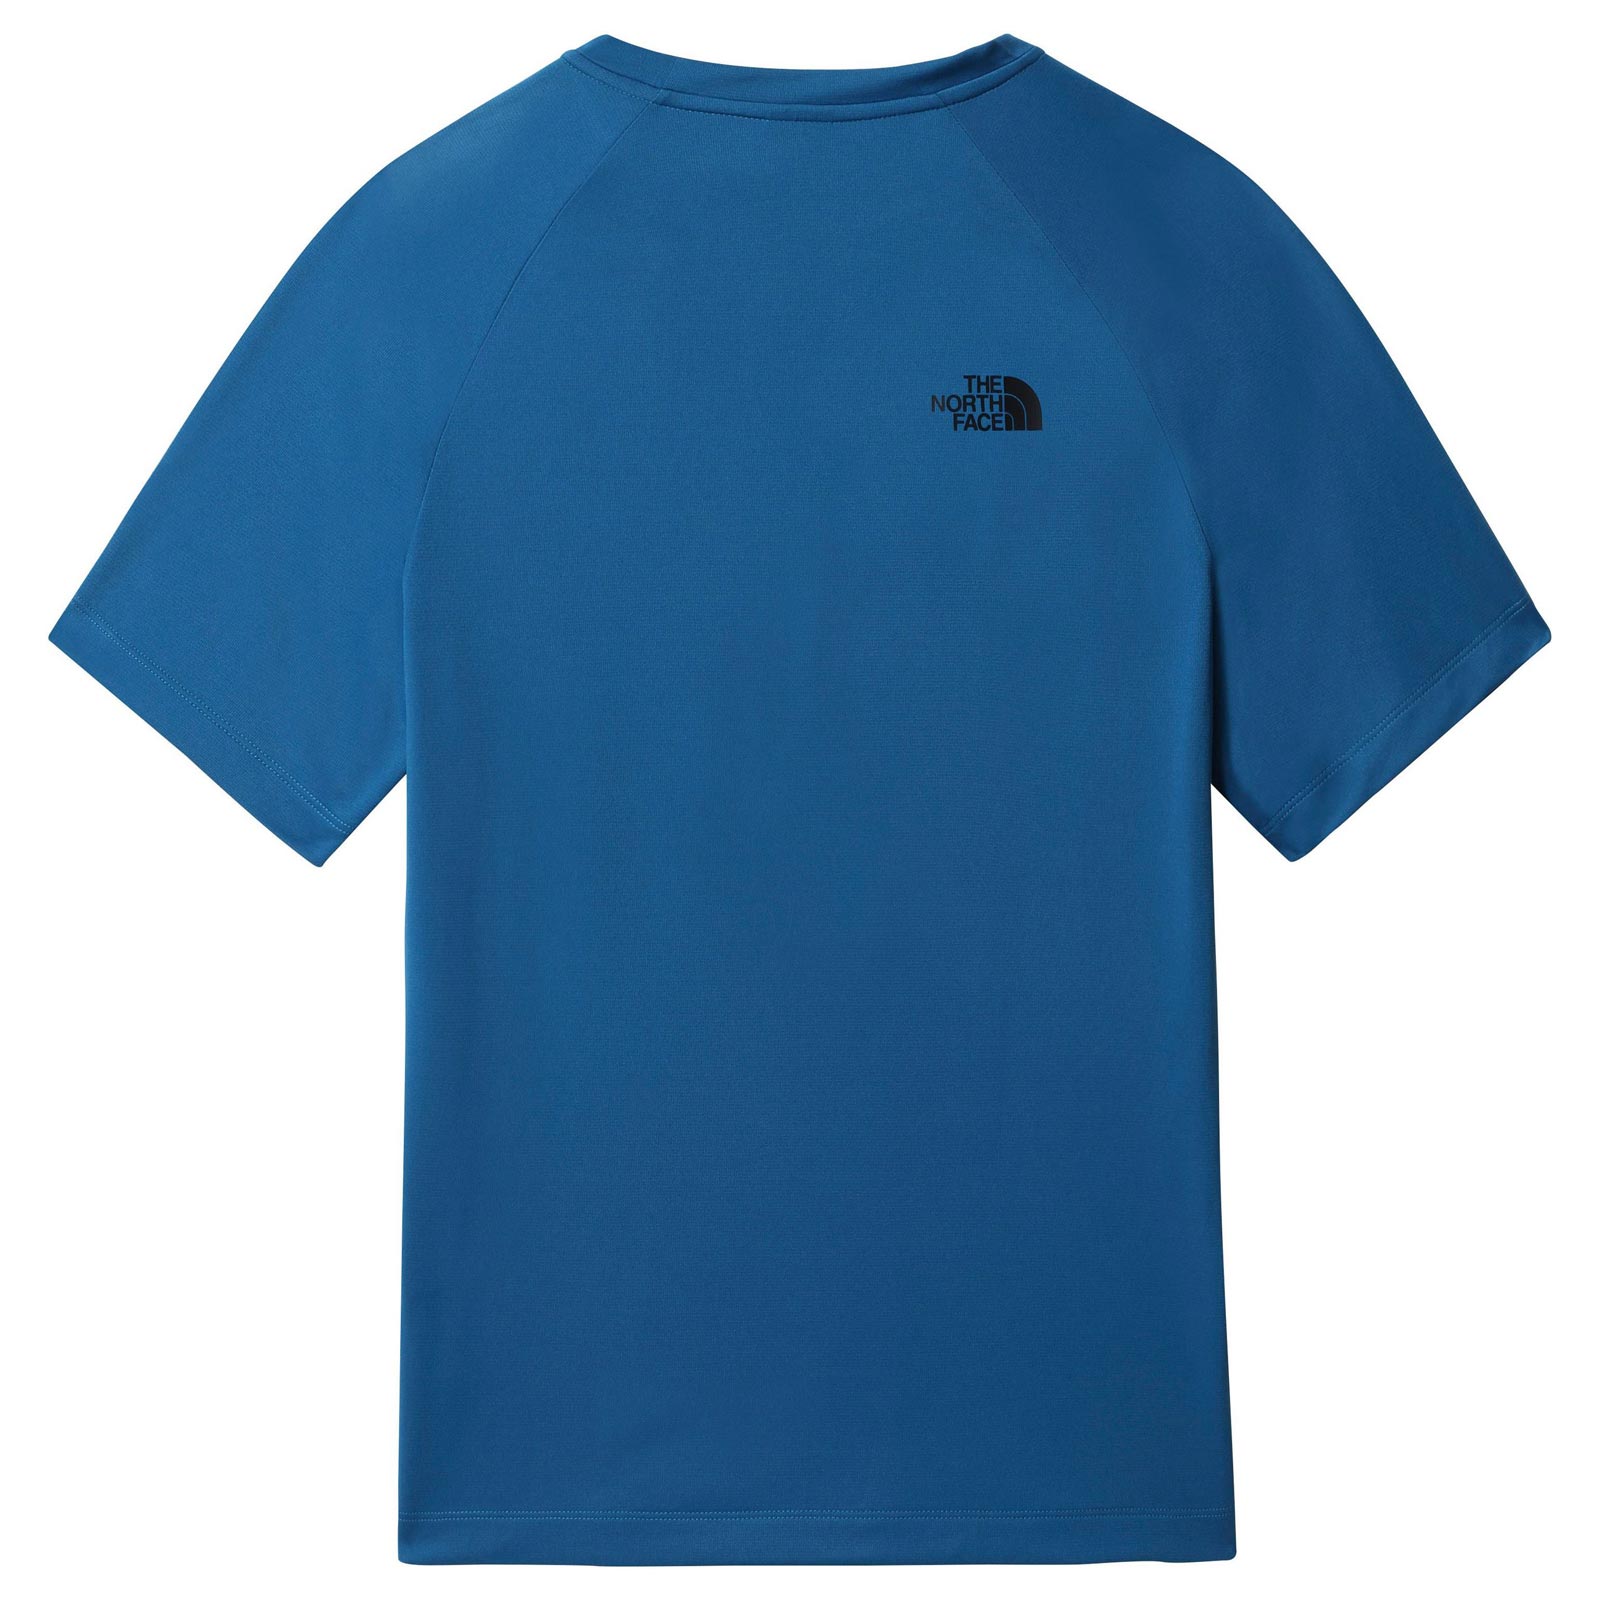 THE NORTH FACE ODLES MENS TECH T-SHIRT